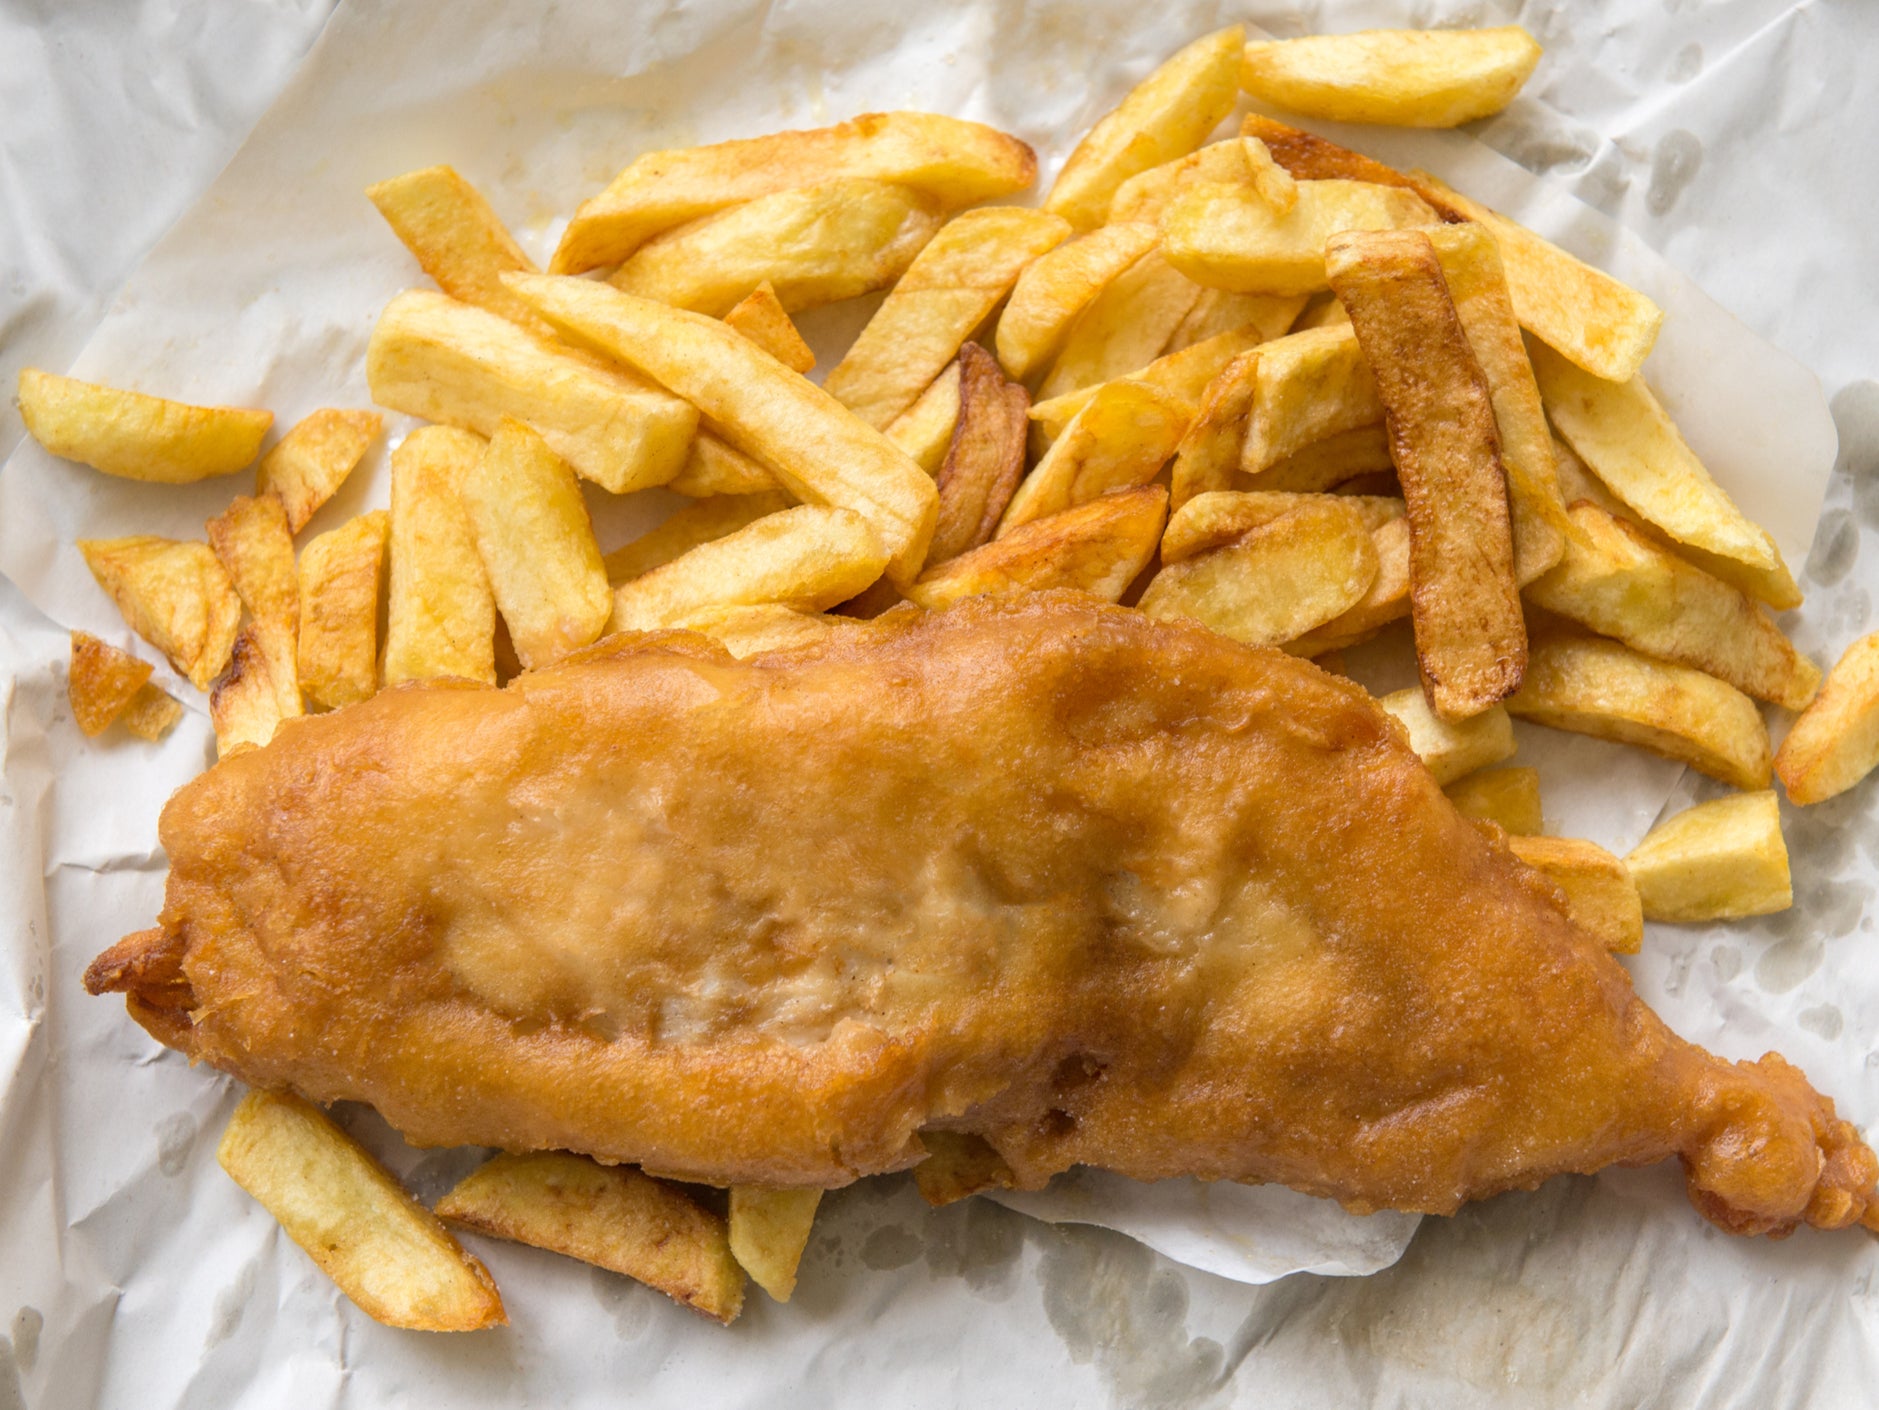 You could get six portions of fish and chips for £15 back in 2008, compared to around one and a half now